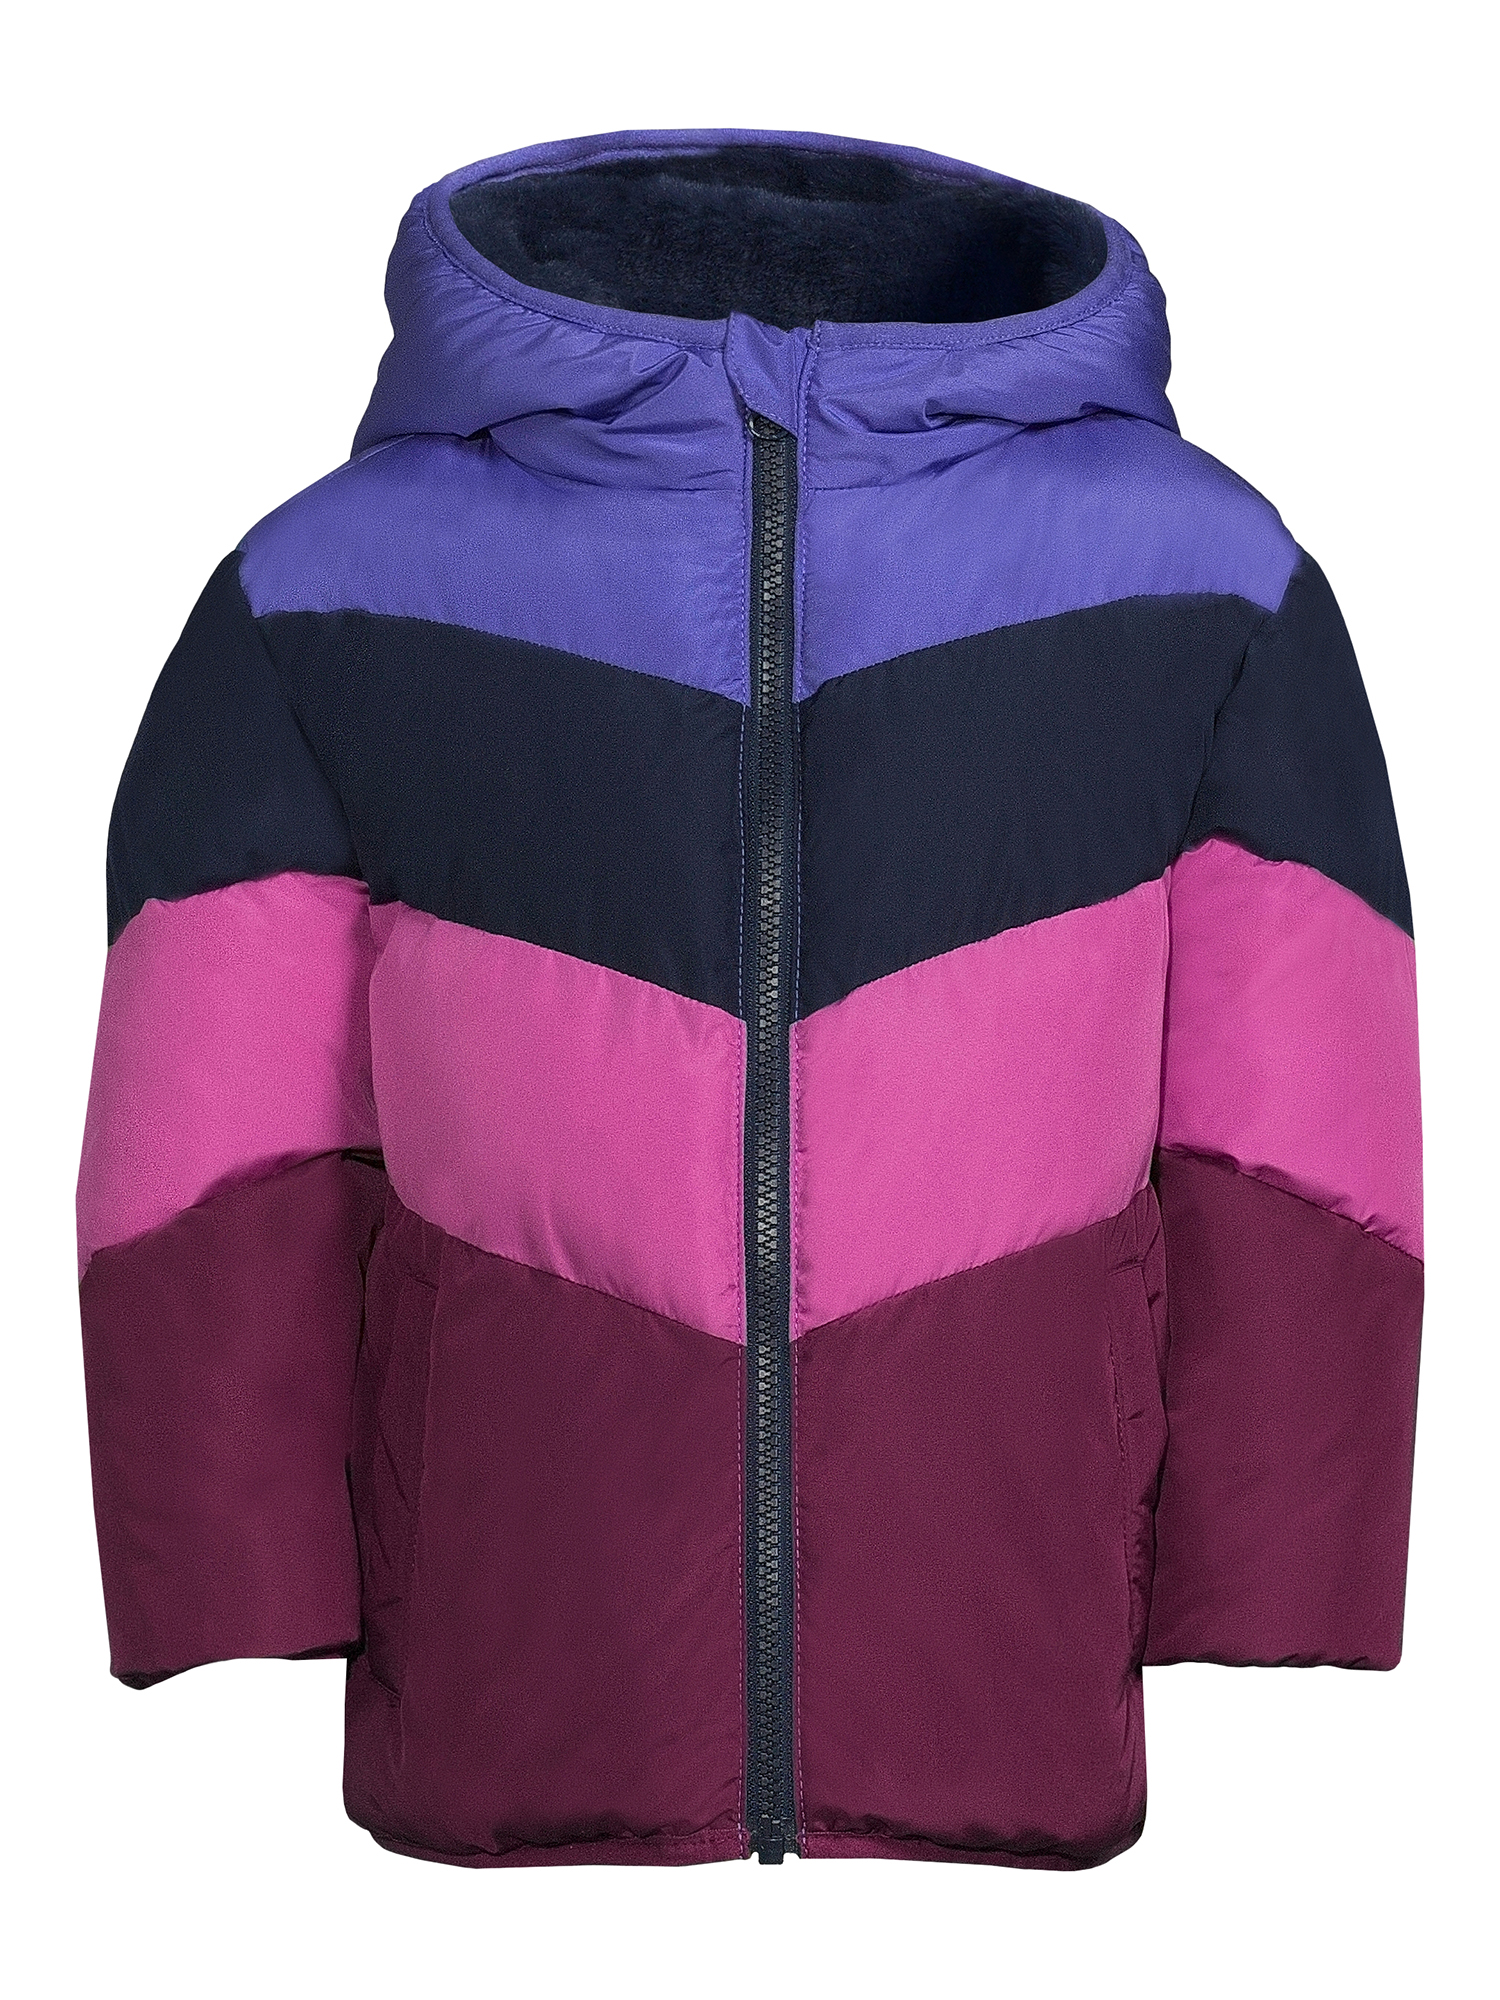 Swiss Tech Baby and Toddler Girls Puffer Jacket with Hood, Sizes 12M-5T - image 5 of 6